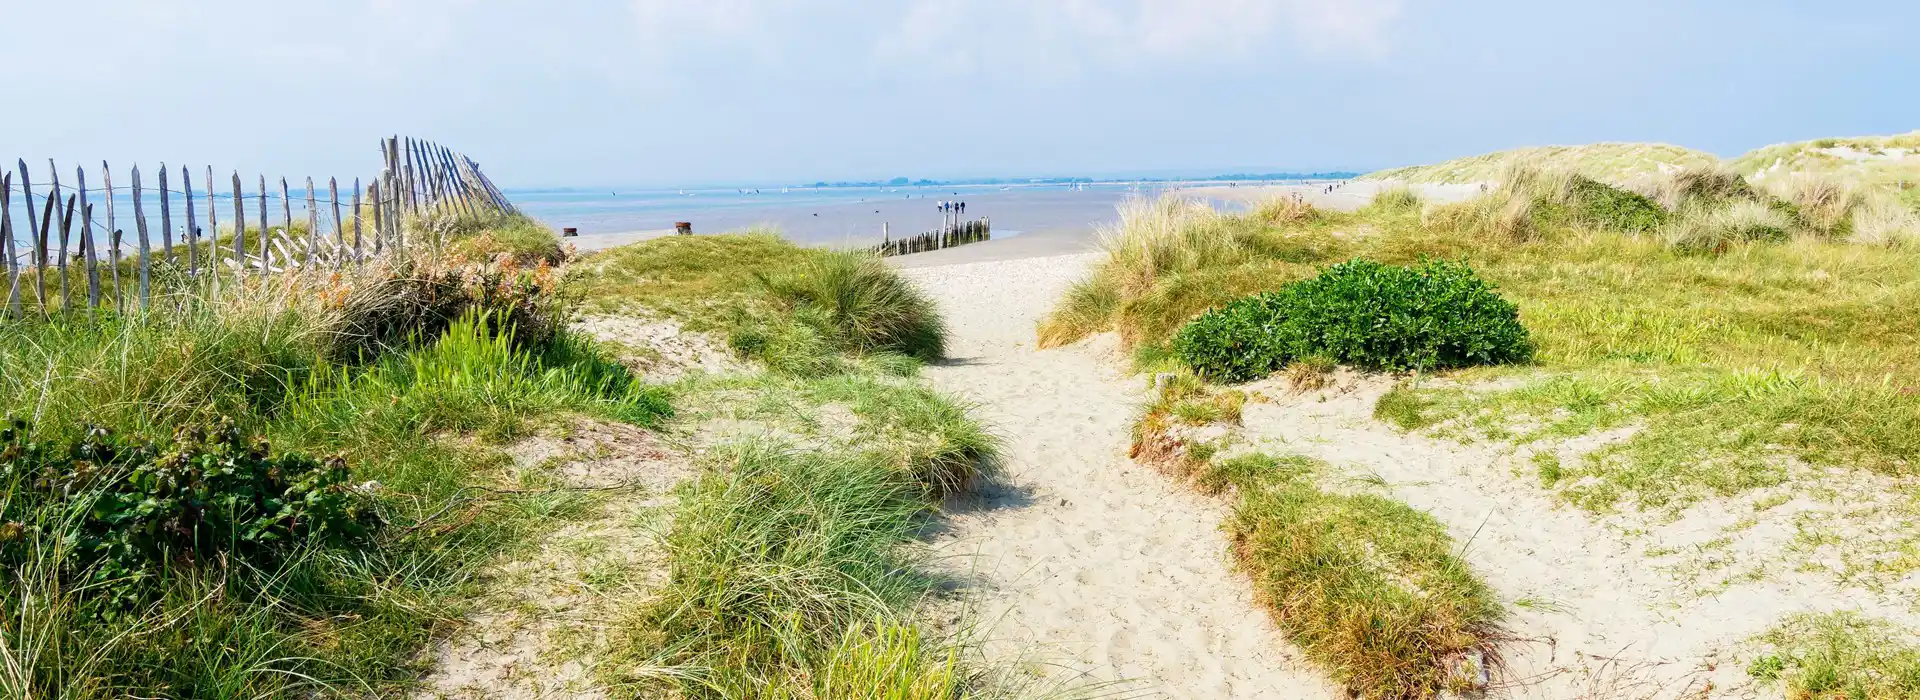 Campsites near West Wittering beach